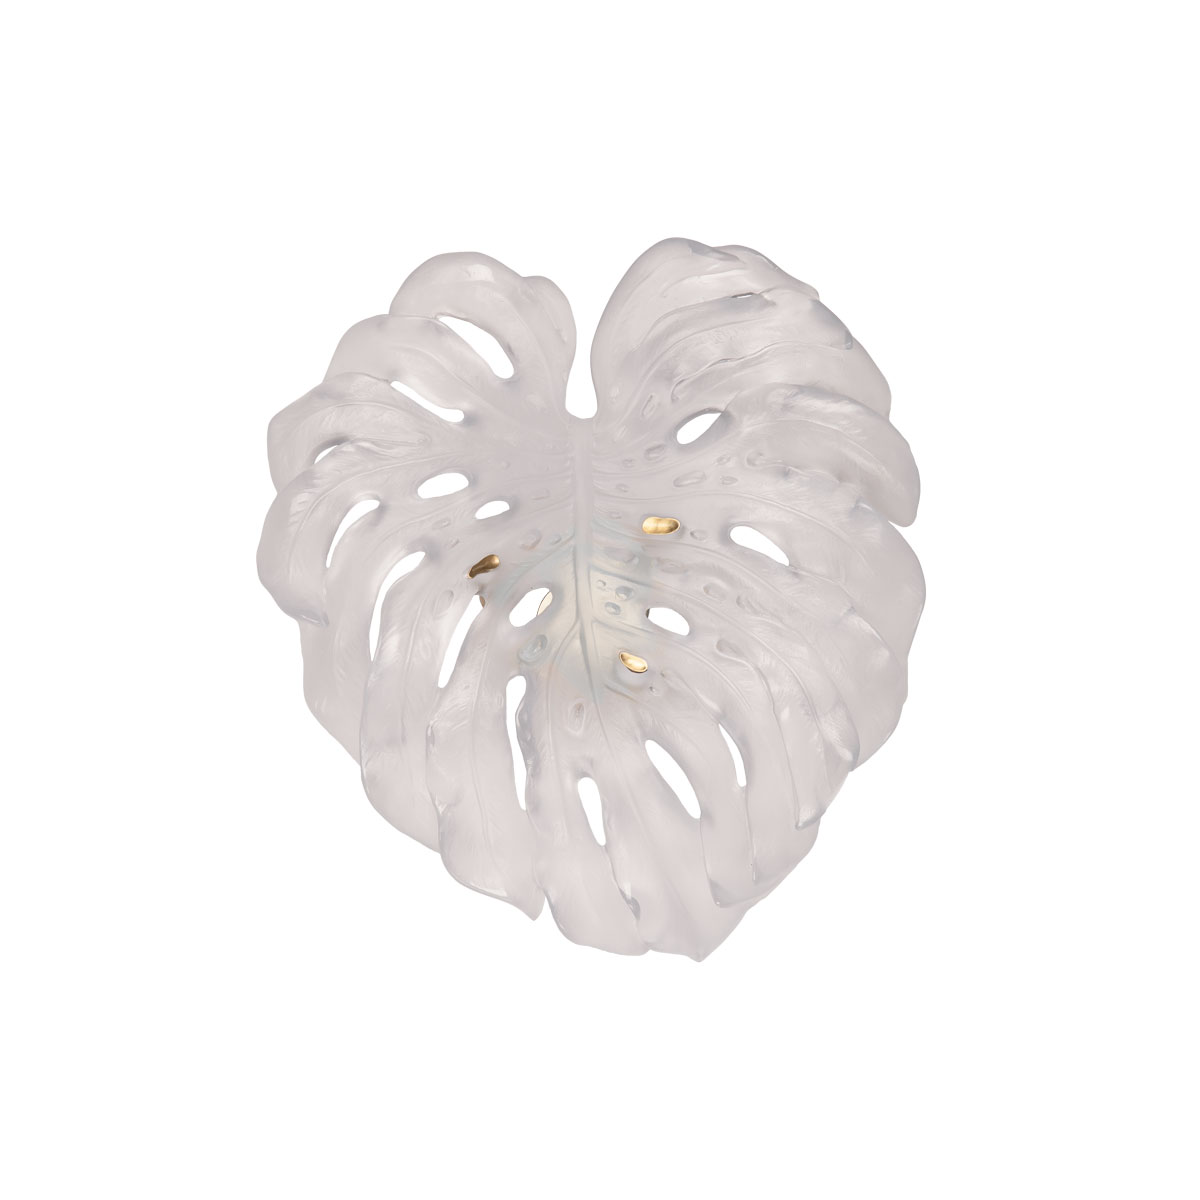 Daum Small Short-Fixture Monstera Wall Leaf in White by Emilio Robba, Sconce